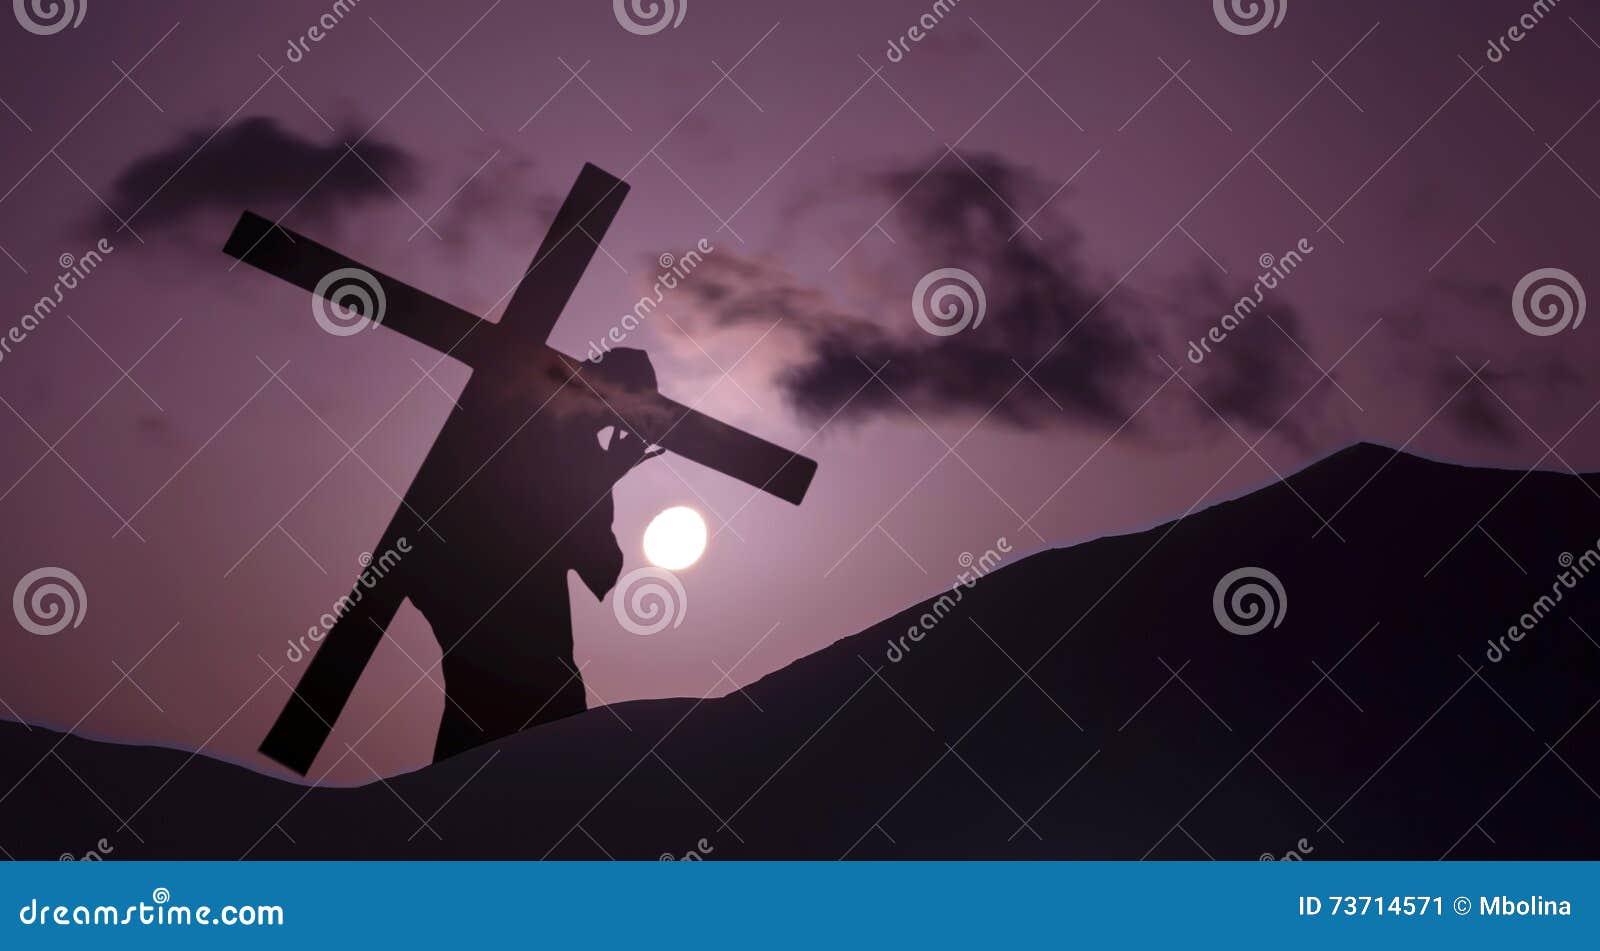 jesus christ carrying cross up calvary on good friday